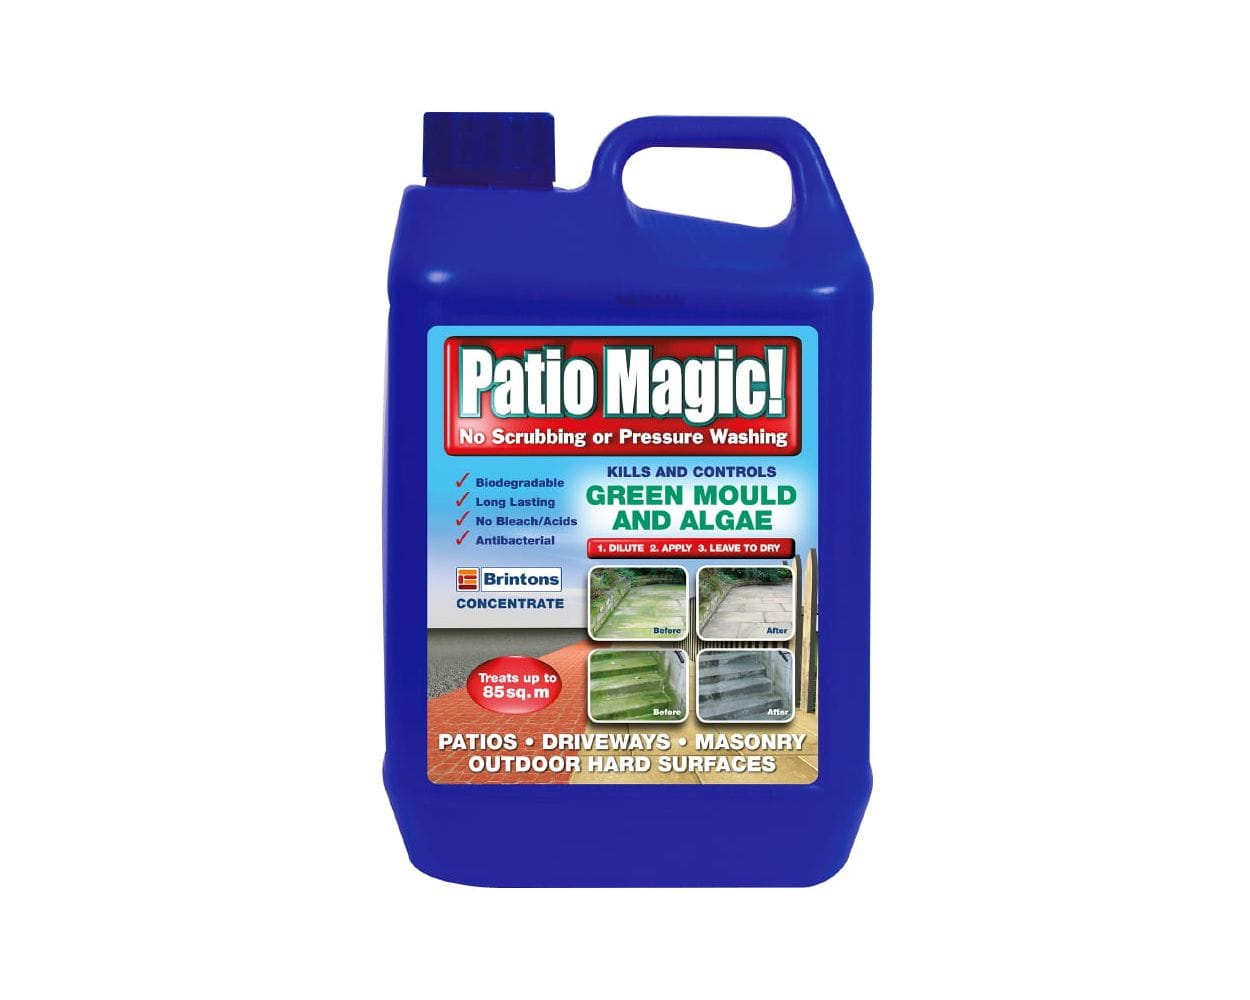 Evergreen Garden Care Garden Cleaning Patio Magic Cleaner 2.5L